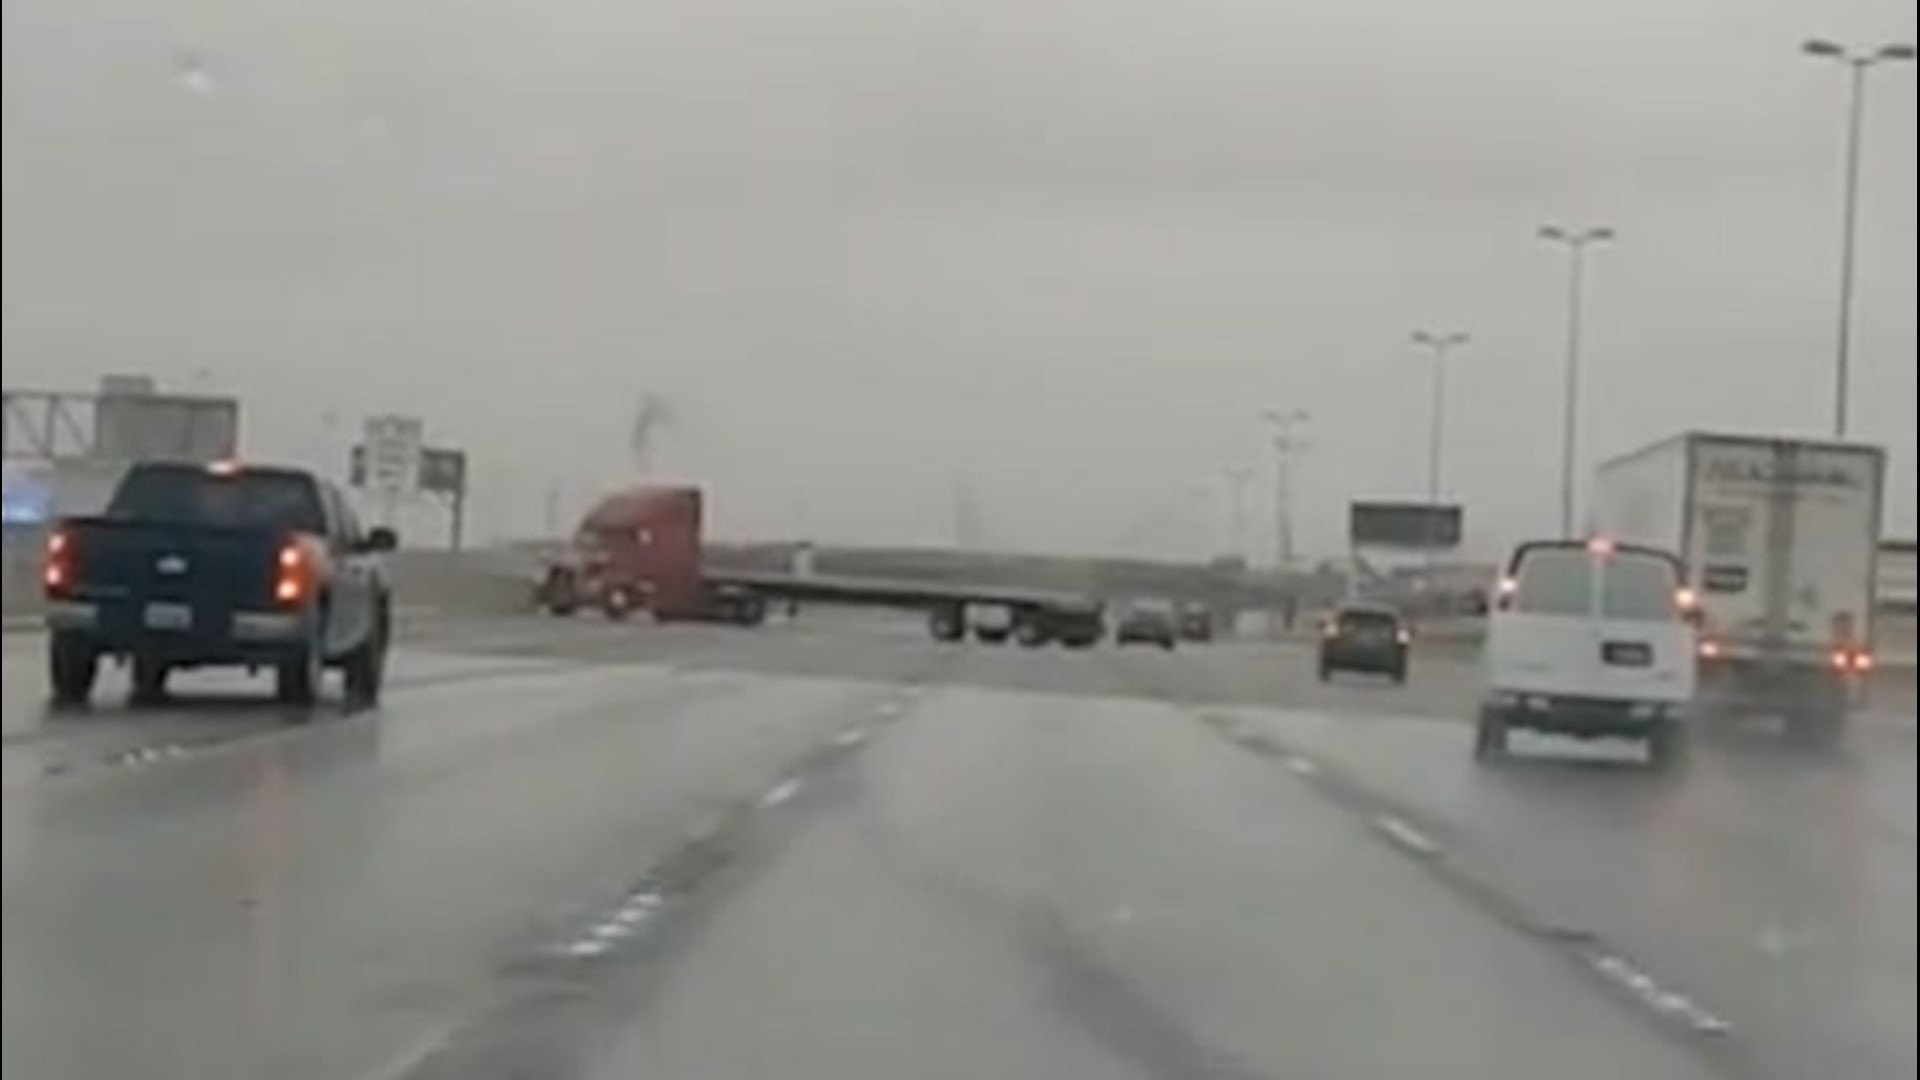 This semi-trailer truck lost control and faced sideways on Interstate 15 southbound in Las Vegas, Nevada, on Jan. 25, due to slippery road conditions from rain.